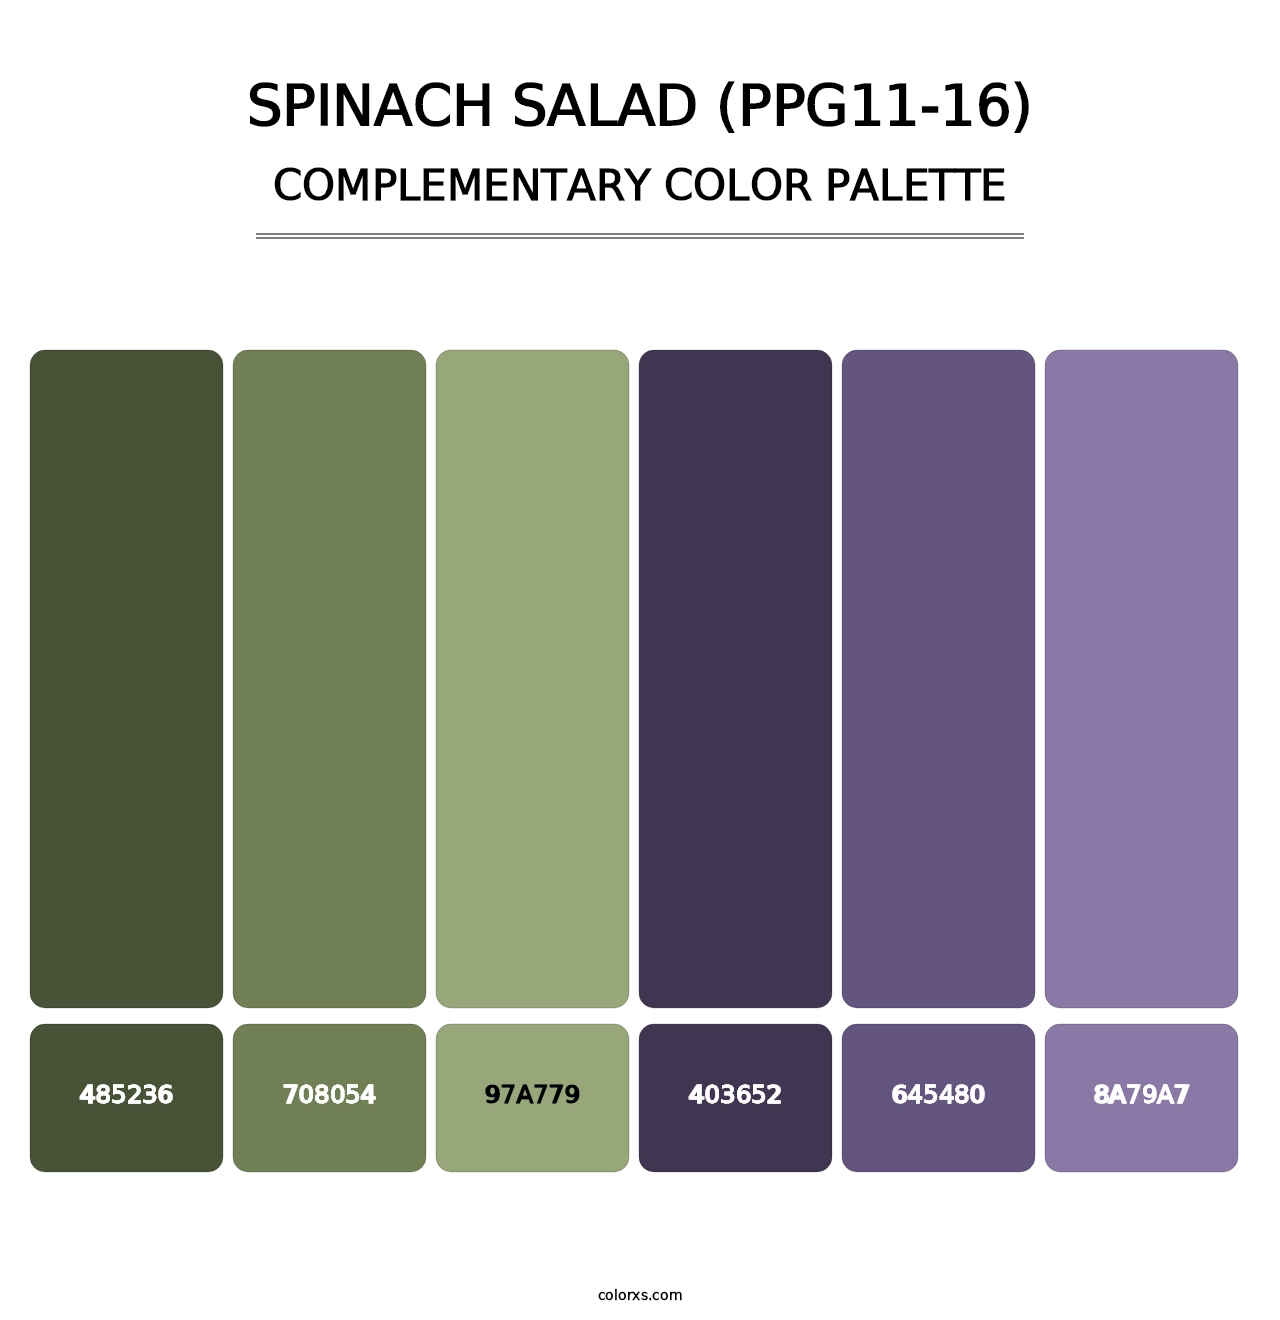 Spinach Salad (PPG11-16) - Complementary Color Palette